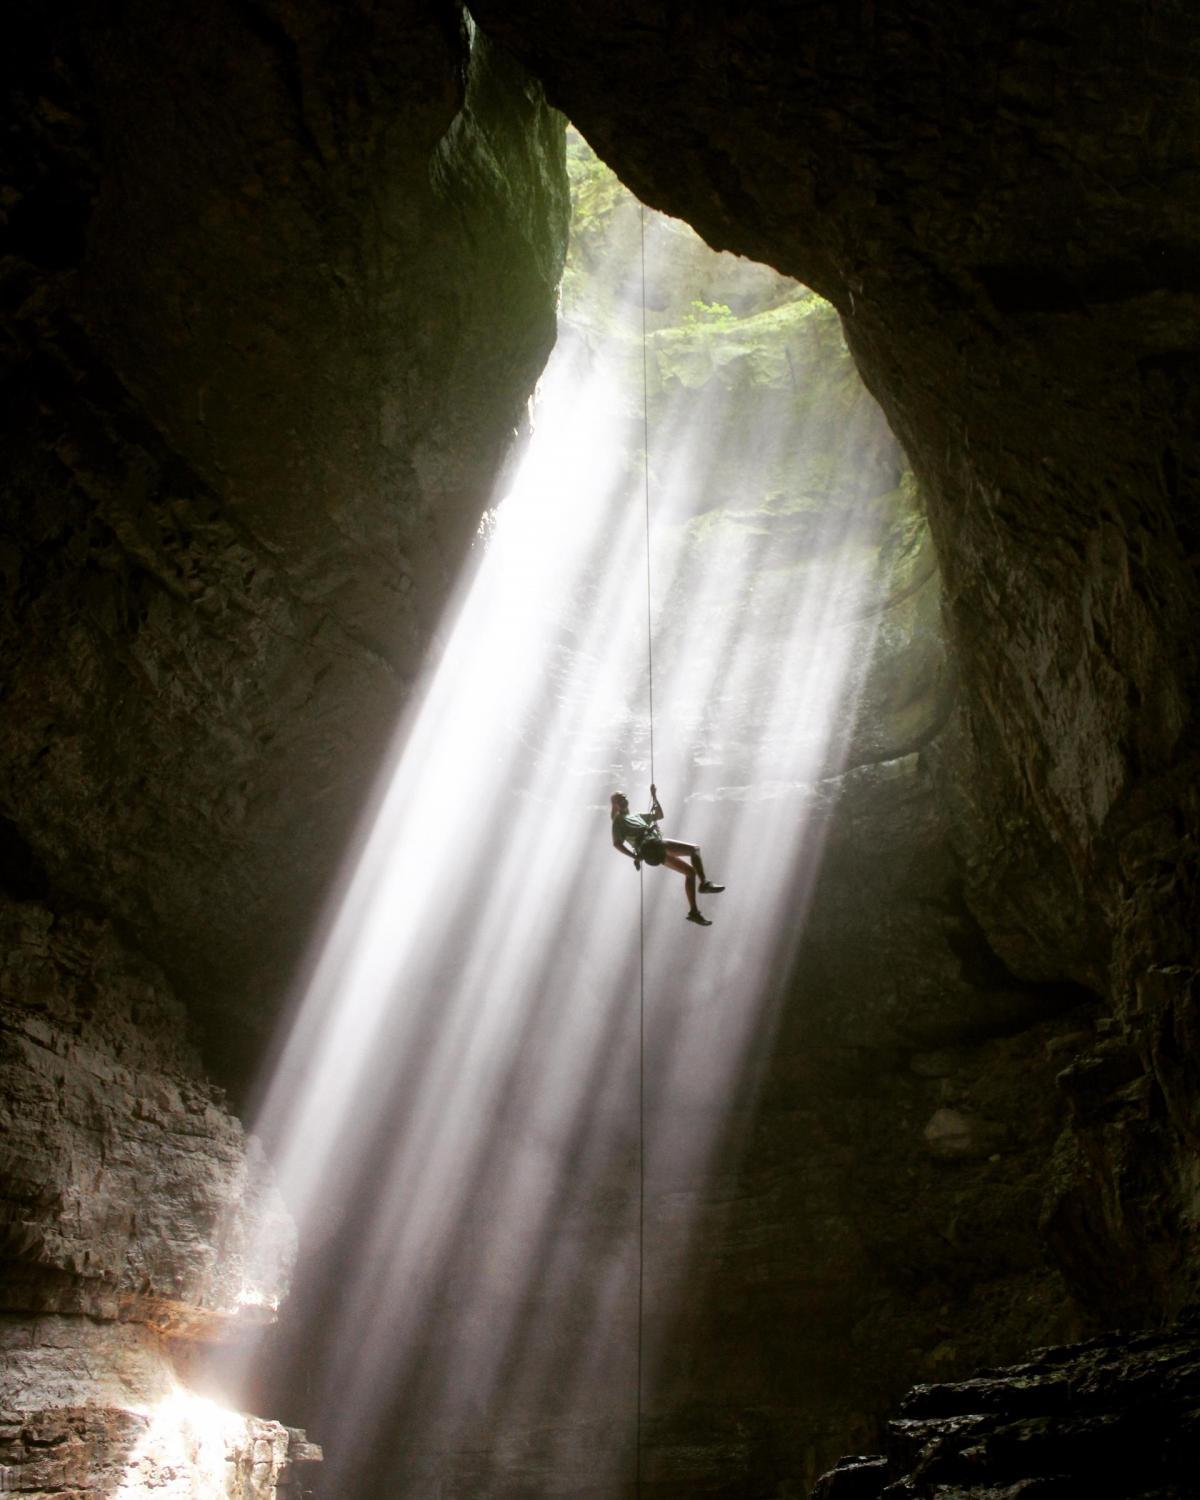 Repelling into Stephens Gap Cave in Alabama for a day of spelunking. This photo won 1st prize in the Summer 2016 Capture Conservation Photo Contest.